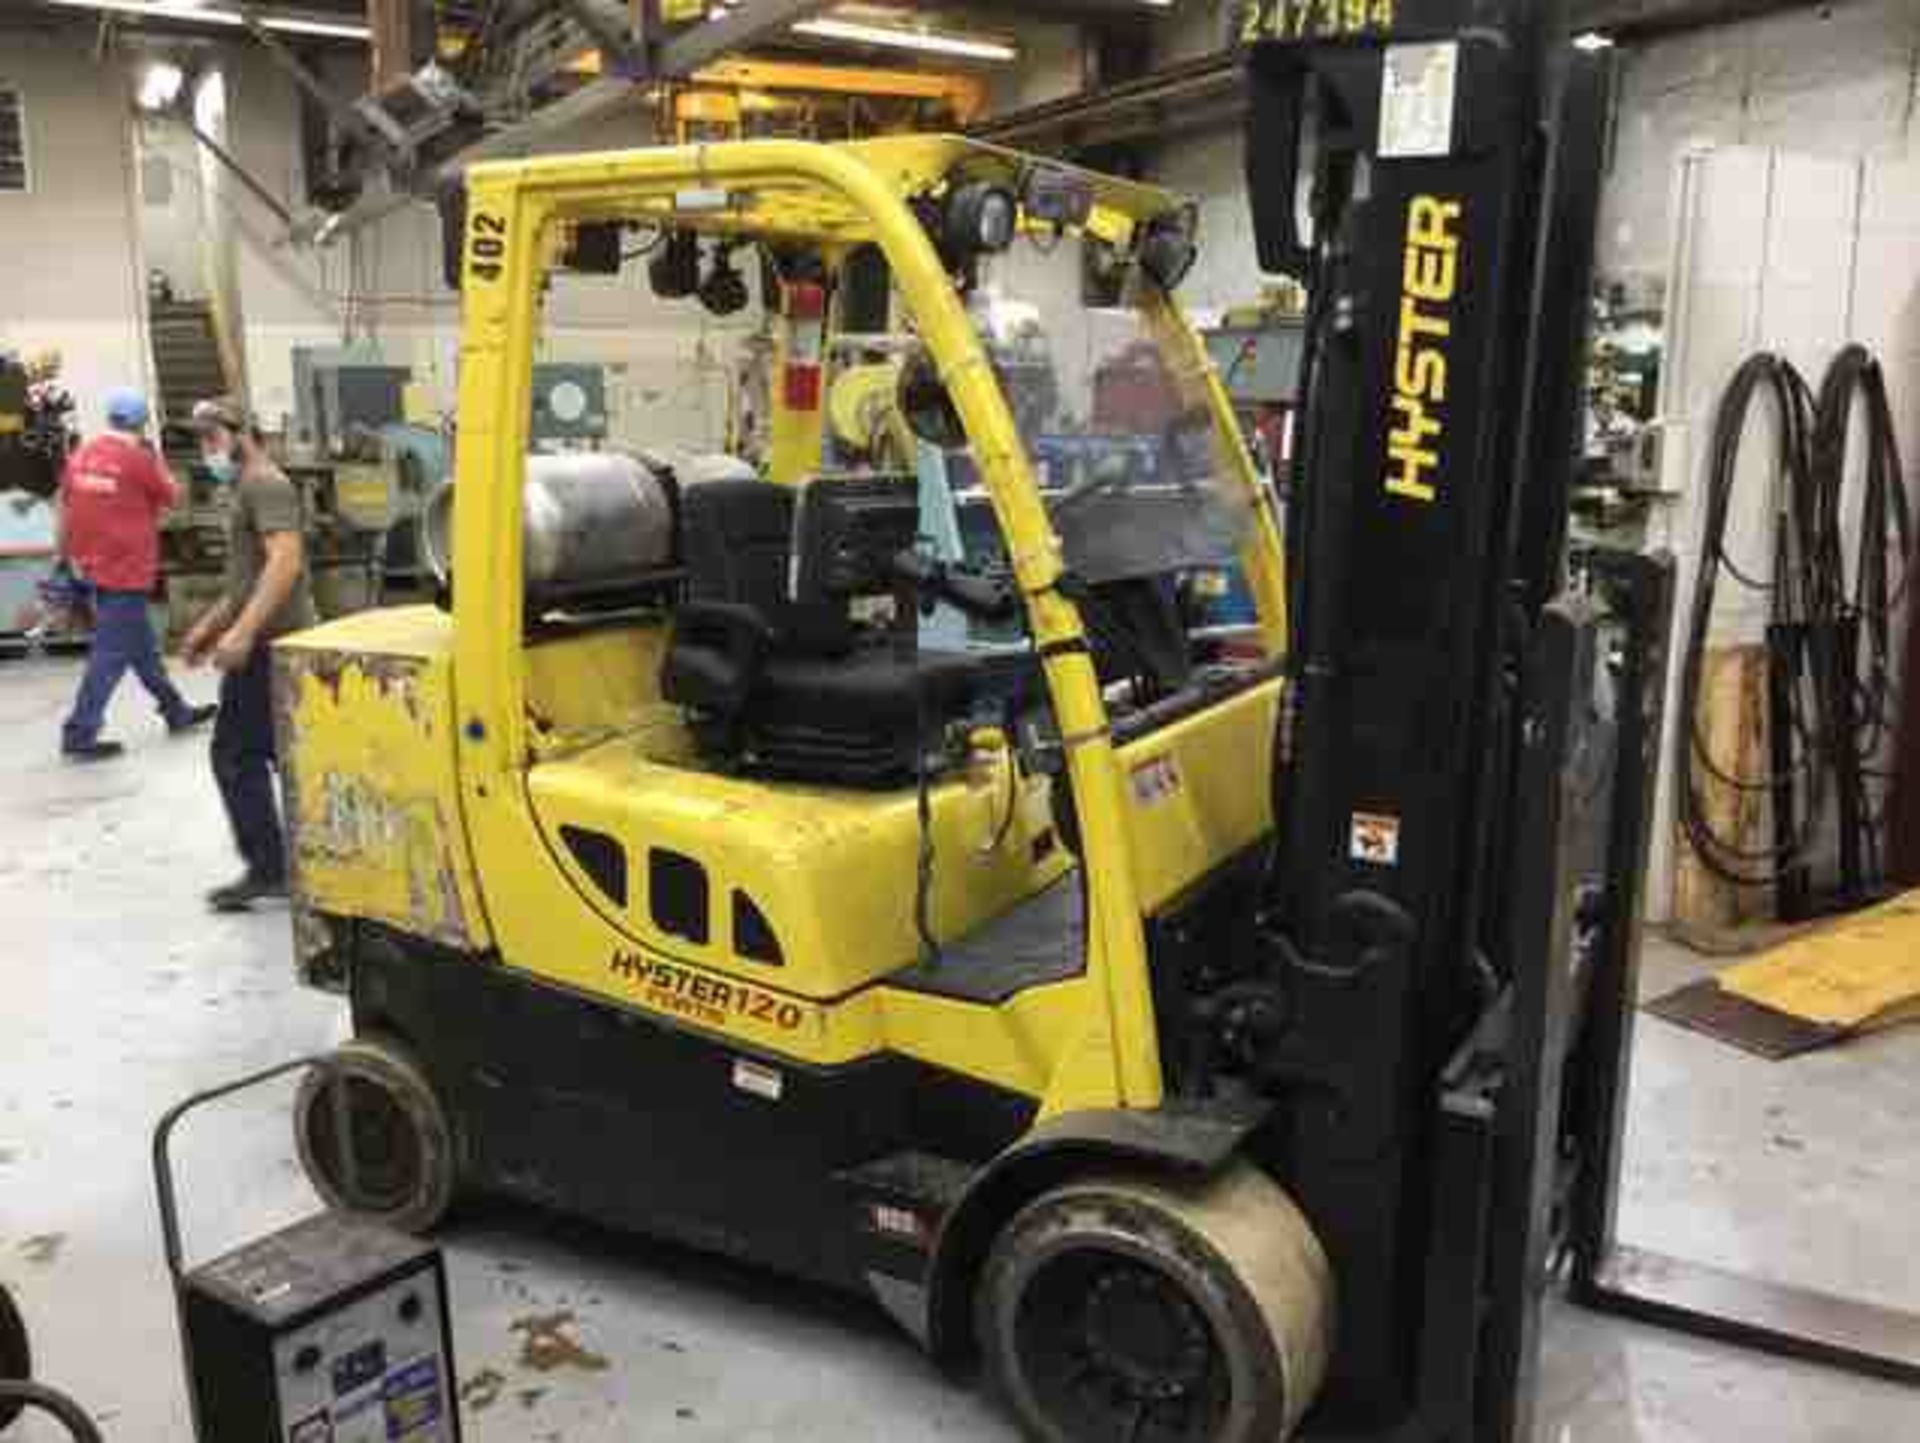 **2014 - 12,000 Lb. Hyster Model S120FTS Cushion Tire Lift Truck (Located offsite) - DESCR CHANGED